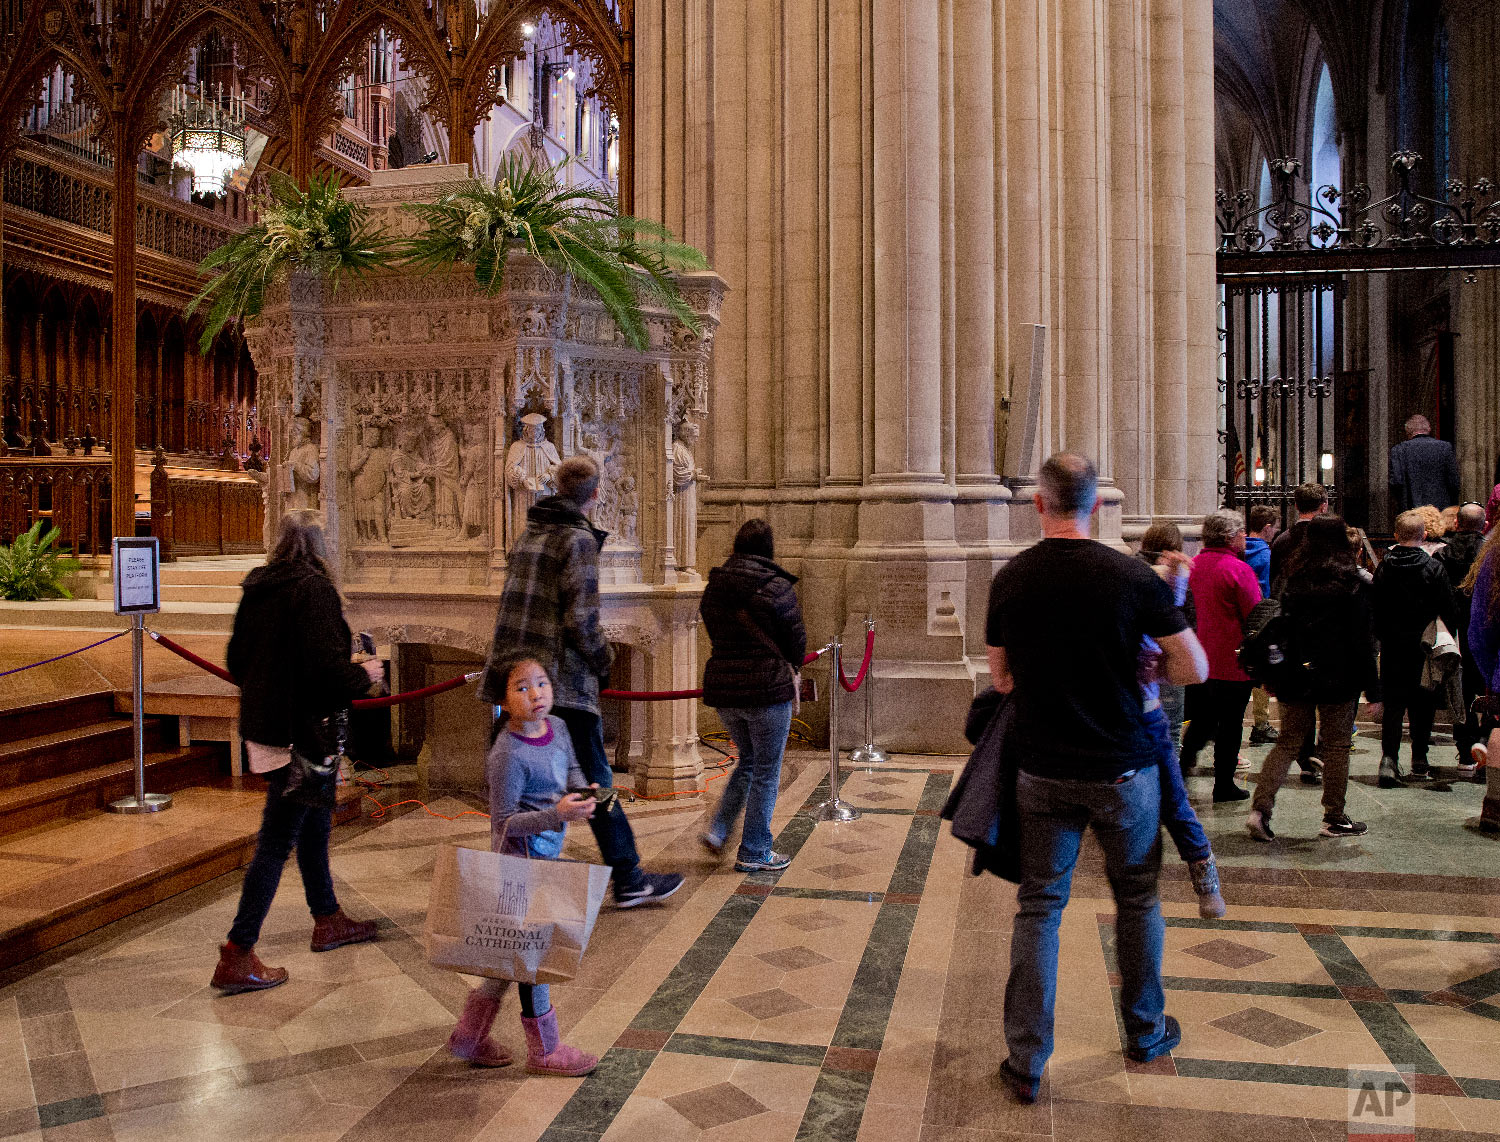  Tour group walks past the Canterbury Pulpit at the National Cathedral in Washington, Monday, March 26, 2018. Rev. Dr. Martin Luther King spoke from the Cathedral's Canterbury Pulpit on March 31, 1968 and it would be his last Sunday sermon before he 